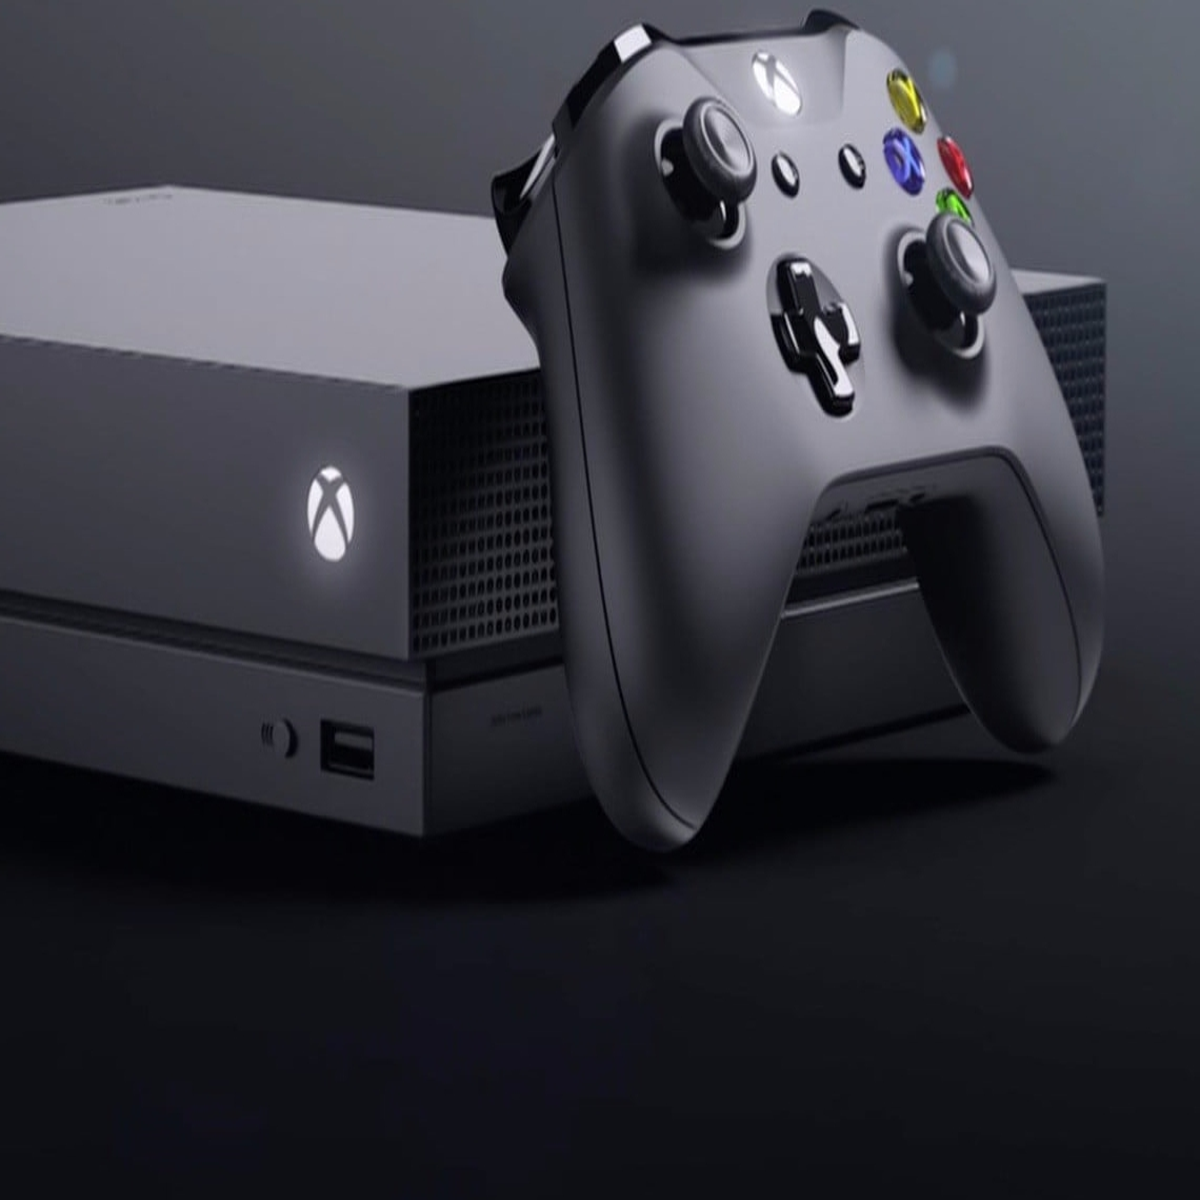 https://assetsio.gnwcdn.com/digitalfoundry-2017-microsoft-xbox-one-x-review-1509716579892.jpg?width=1200&height=1200&fit=crop&quality=100&format=png&enable=upscale&auto=webp